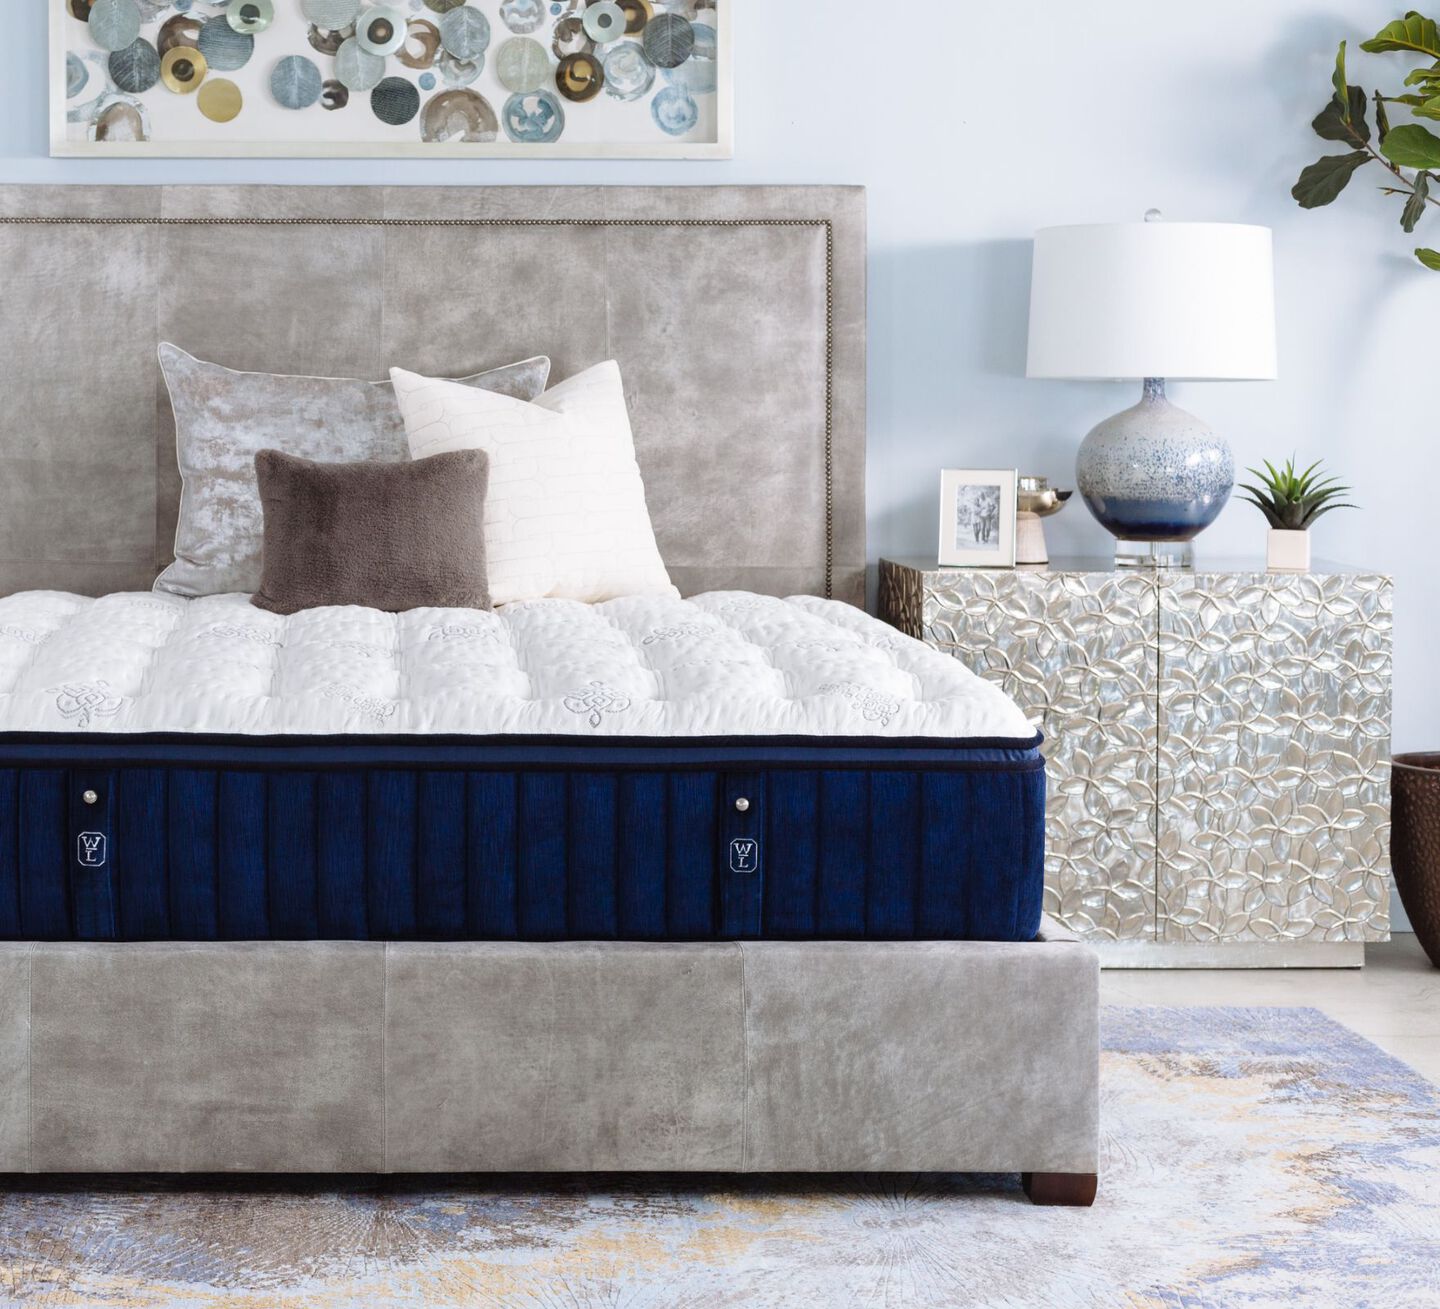 Navy blue and white William & Lawrence mattress next to a silver nightstand with a lamp